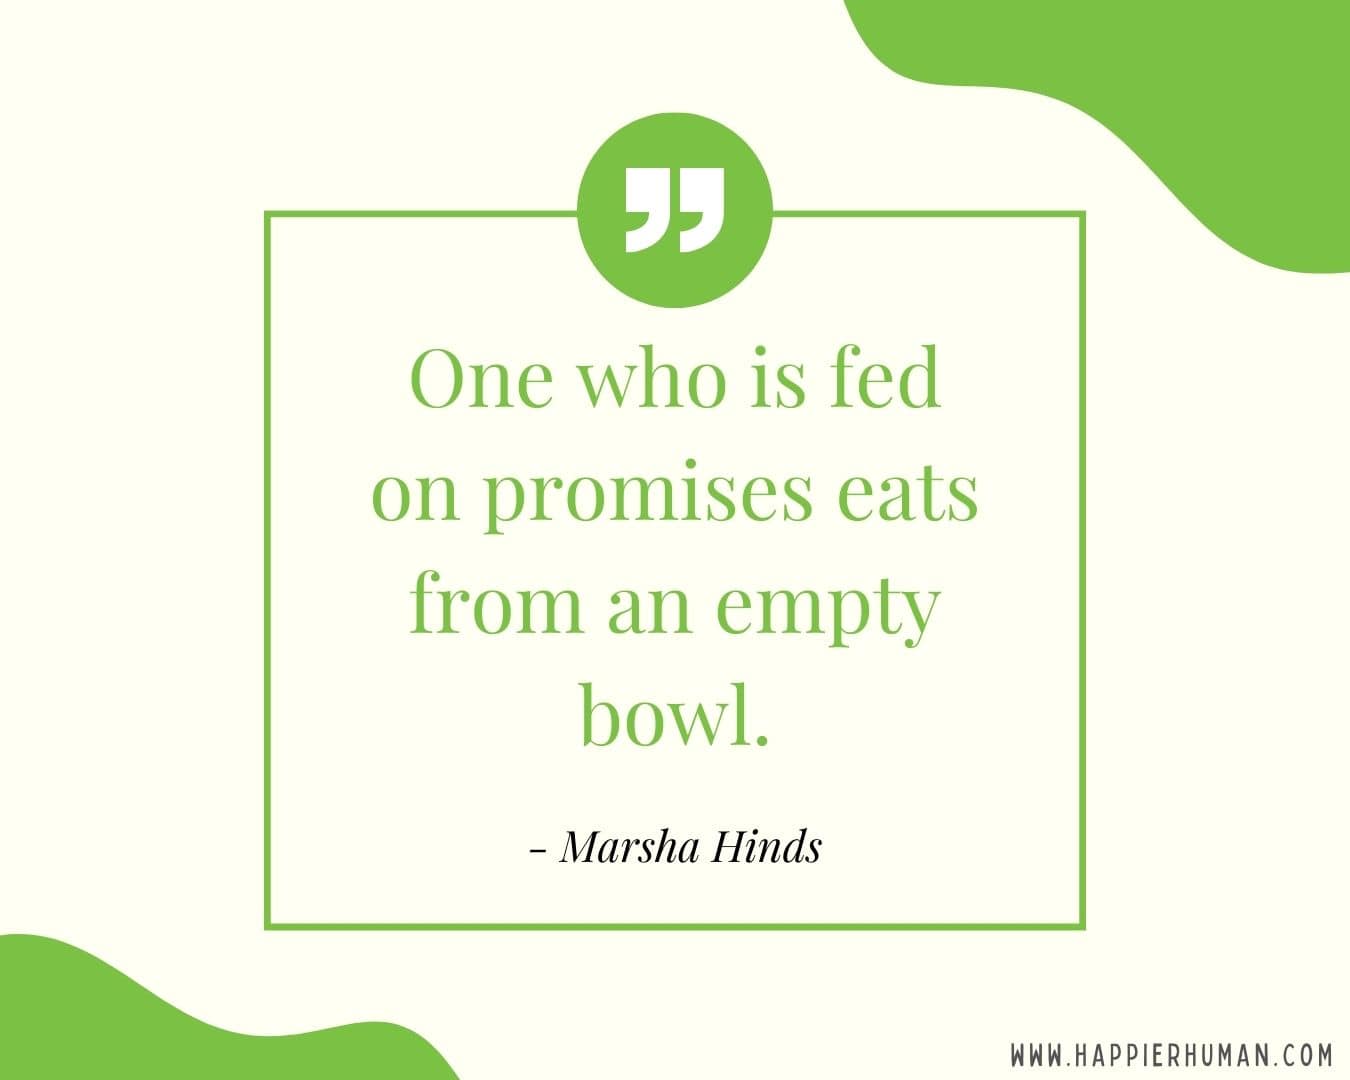 Broken Trust Quotes - “One who is fed on promises eats from an empty bowl.” - Marsha Hinds